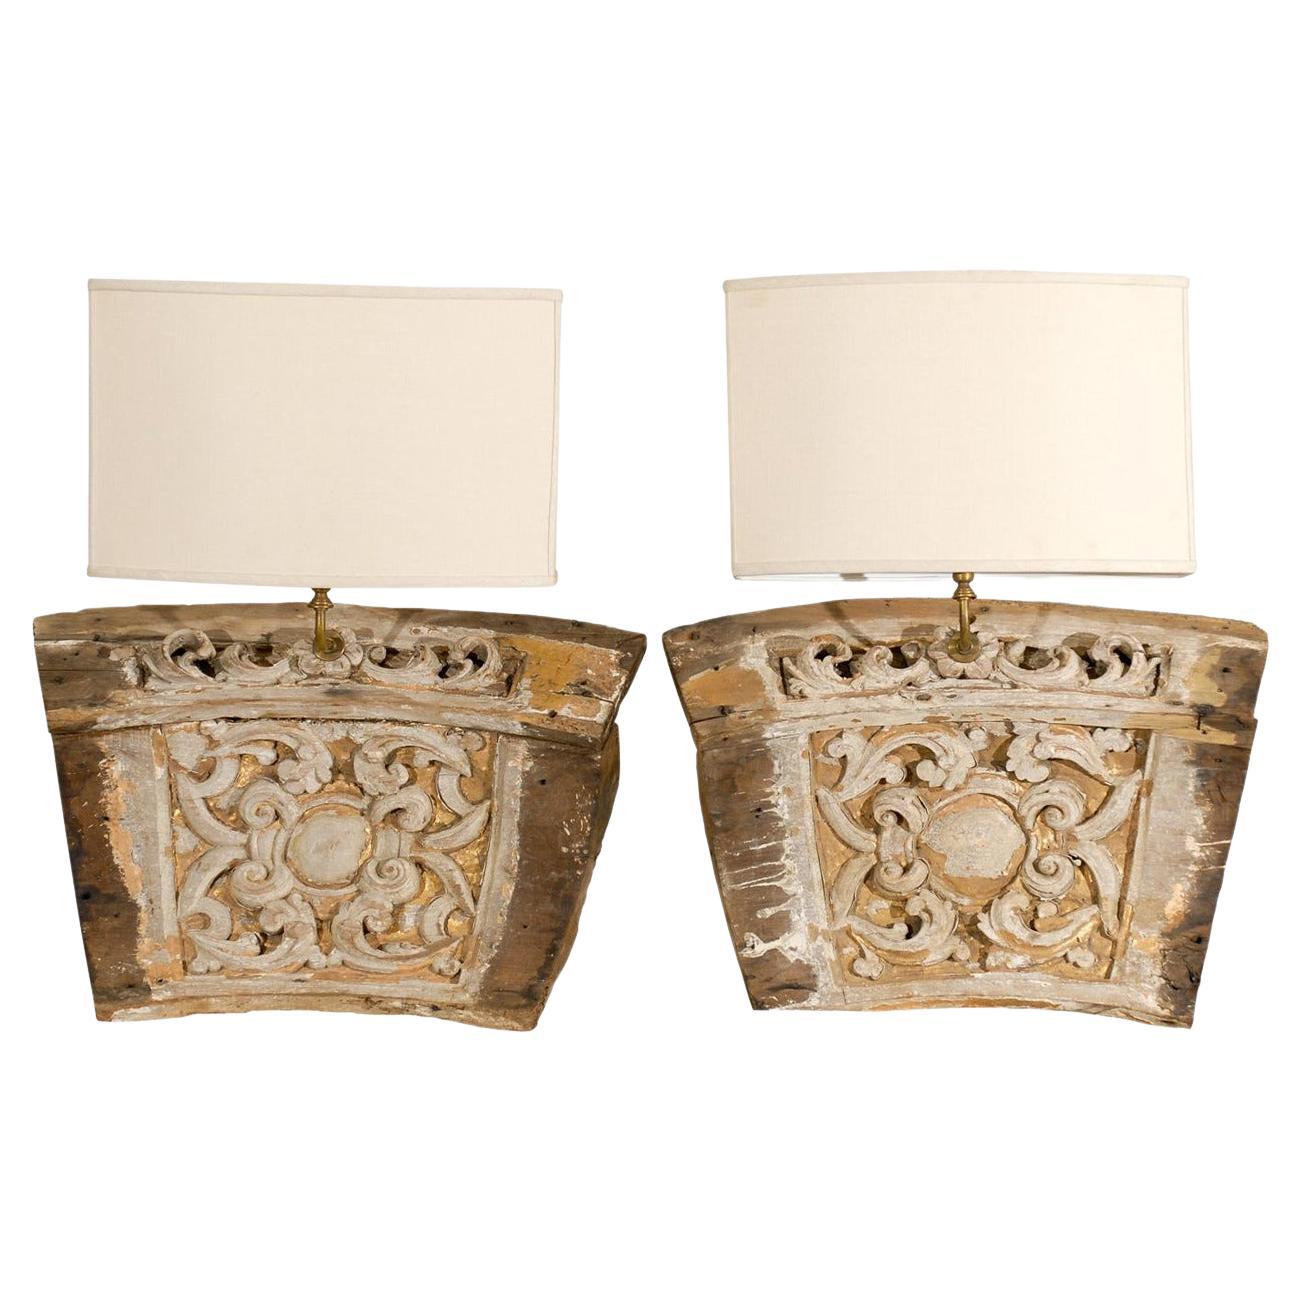 A Single 19th Century Italian Wooden Fragment Made into a Sconce with Gilding